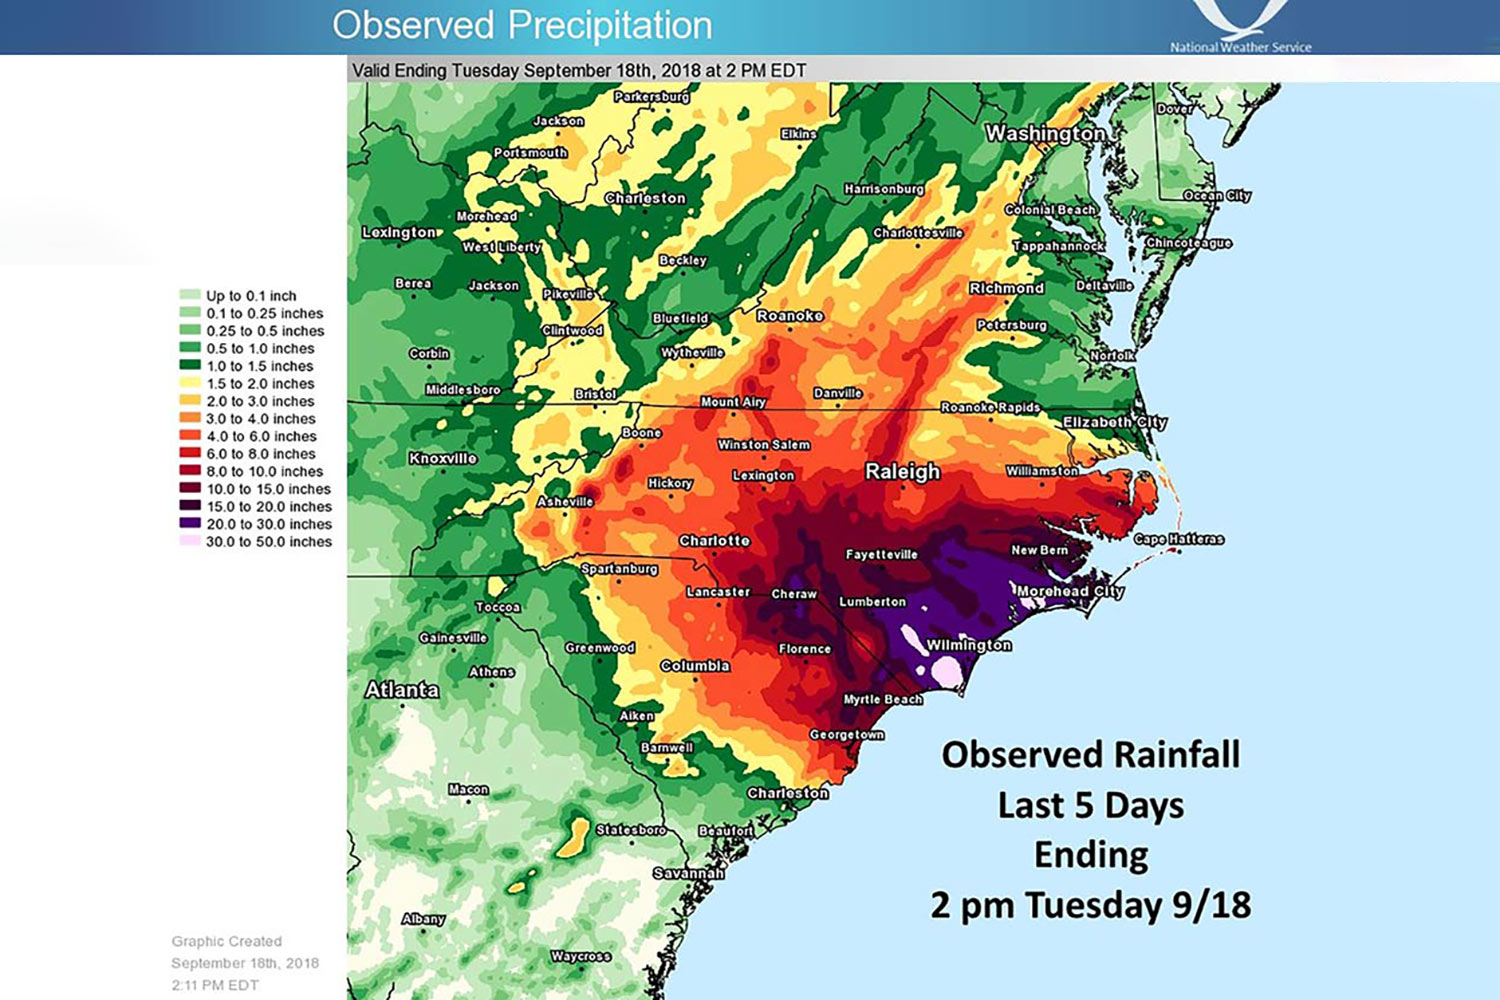 Hurricane Florence brought extreme amounts of rain, leading to flooded rivers and creeks.